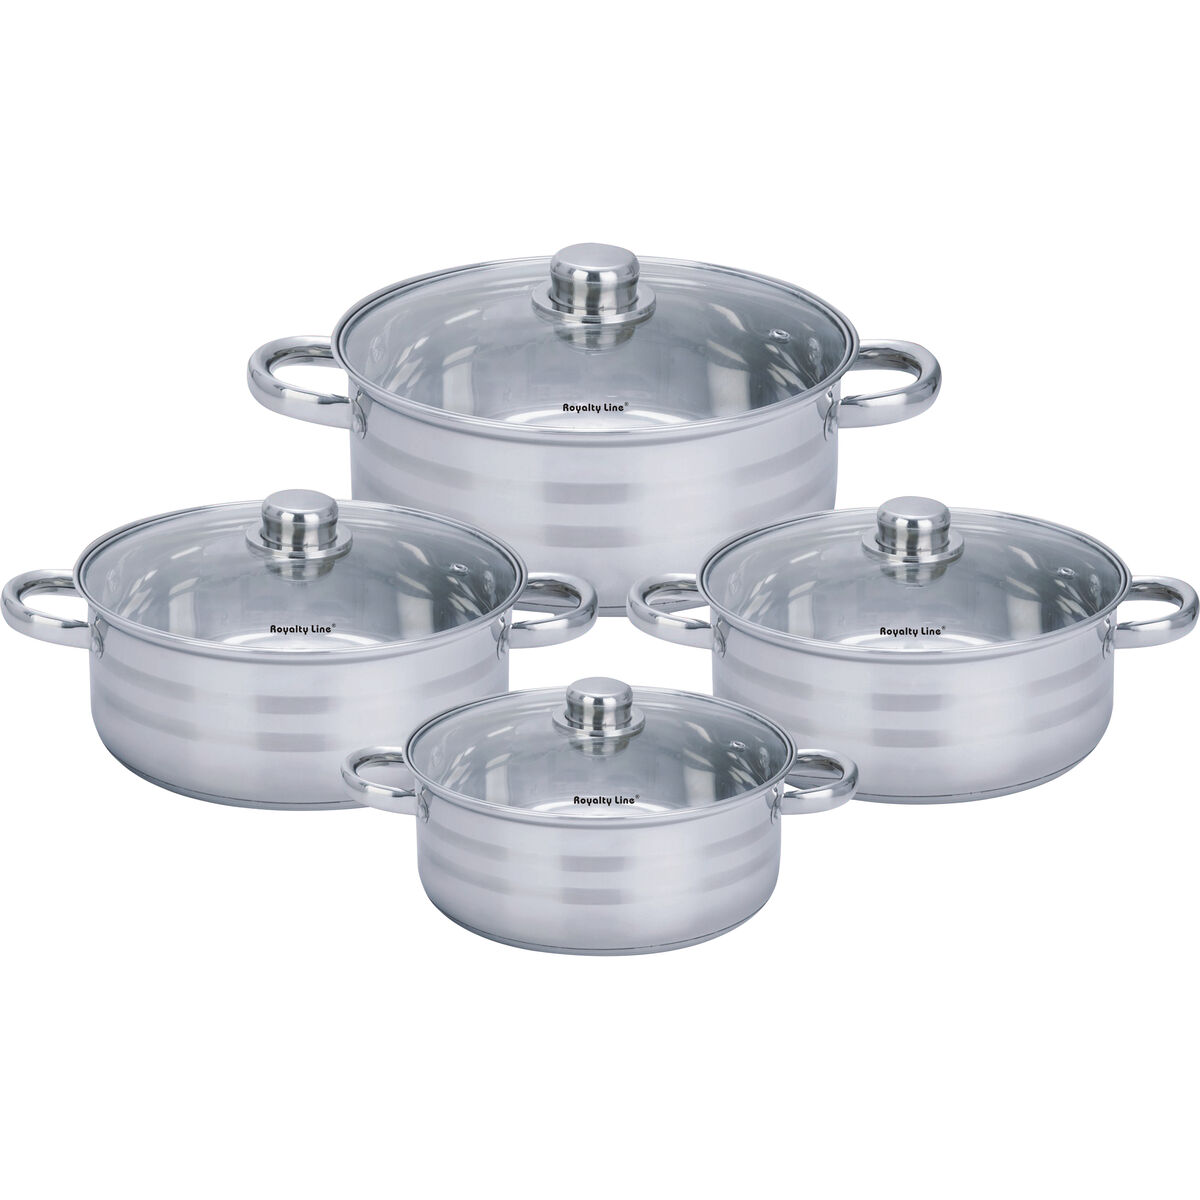 Slow Cooker Royalty Line SP8 3 Pieces